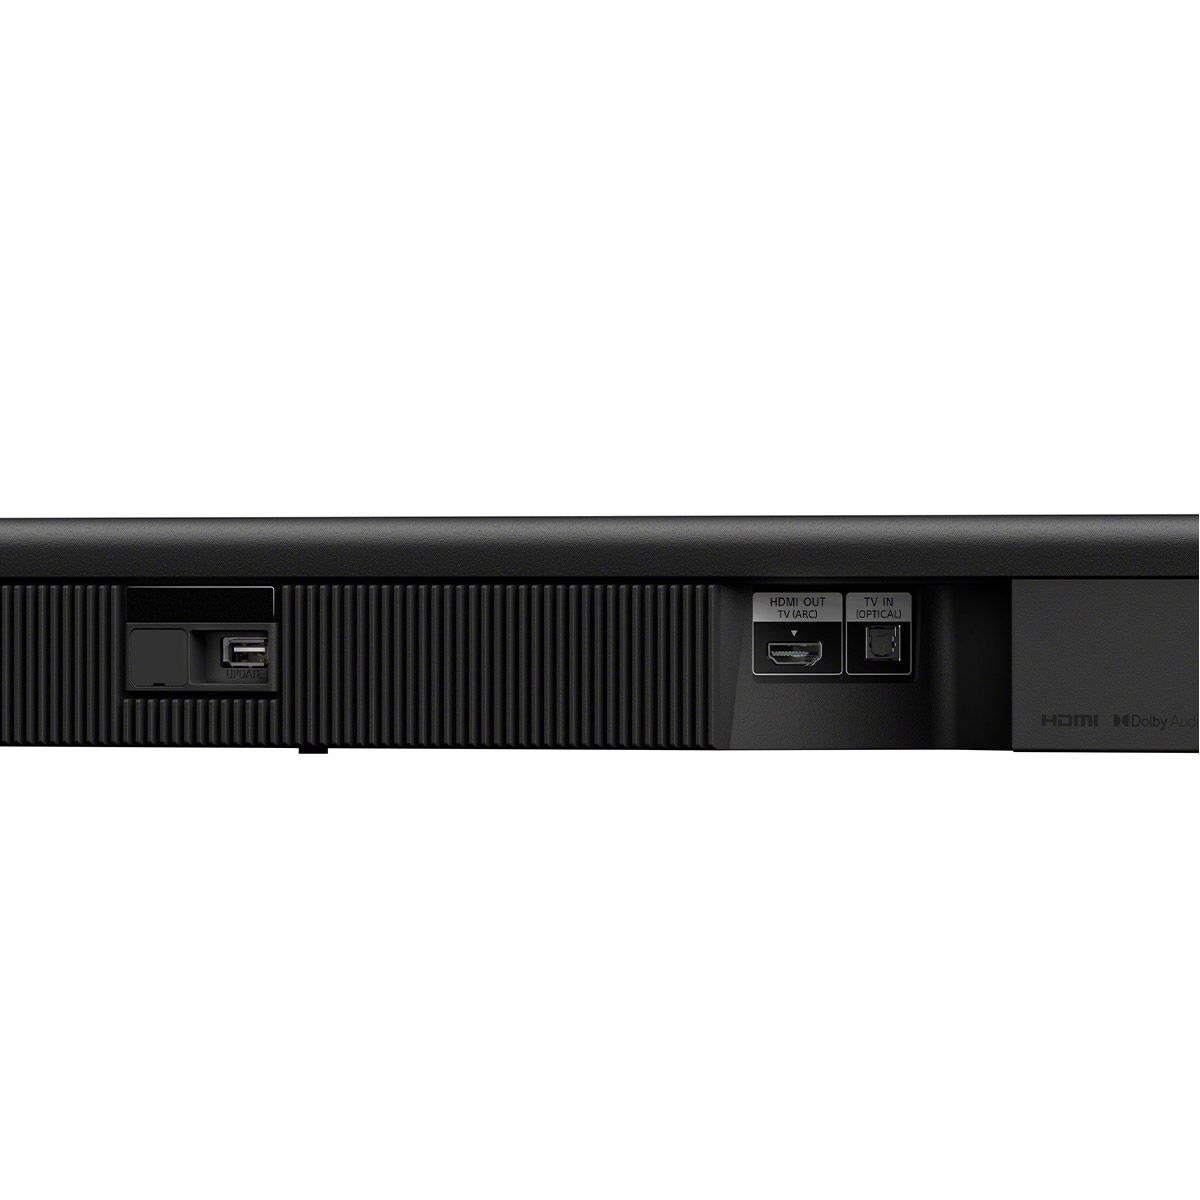 Sony HTS400 2.1ch Soundbar w/ Wireless Subwoofer - rear view of soundbar and connections